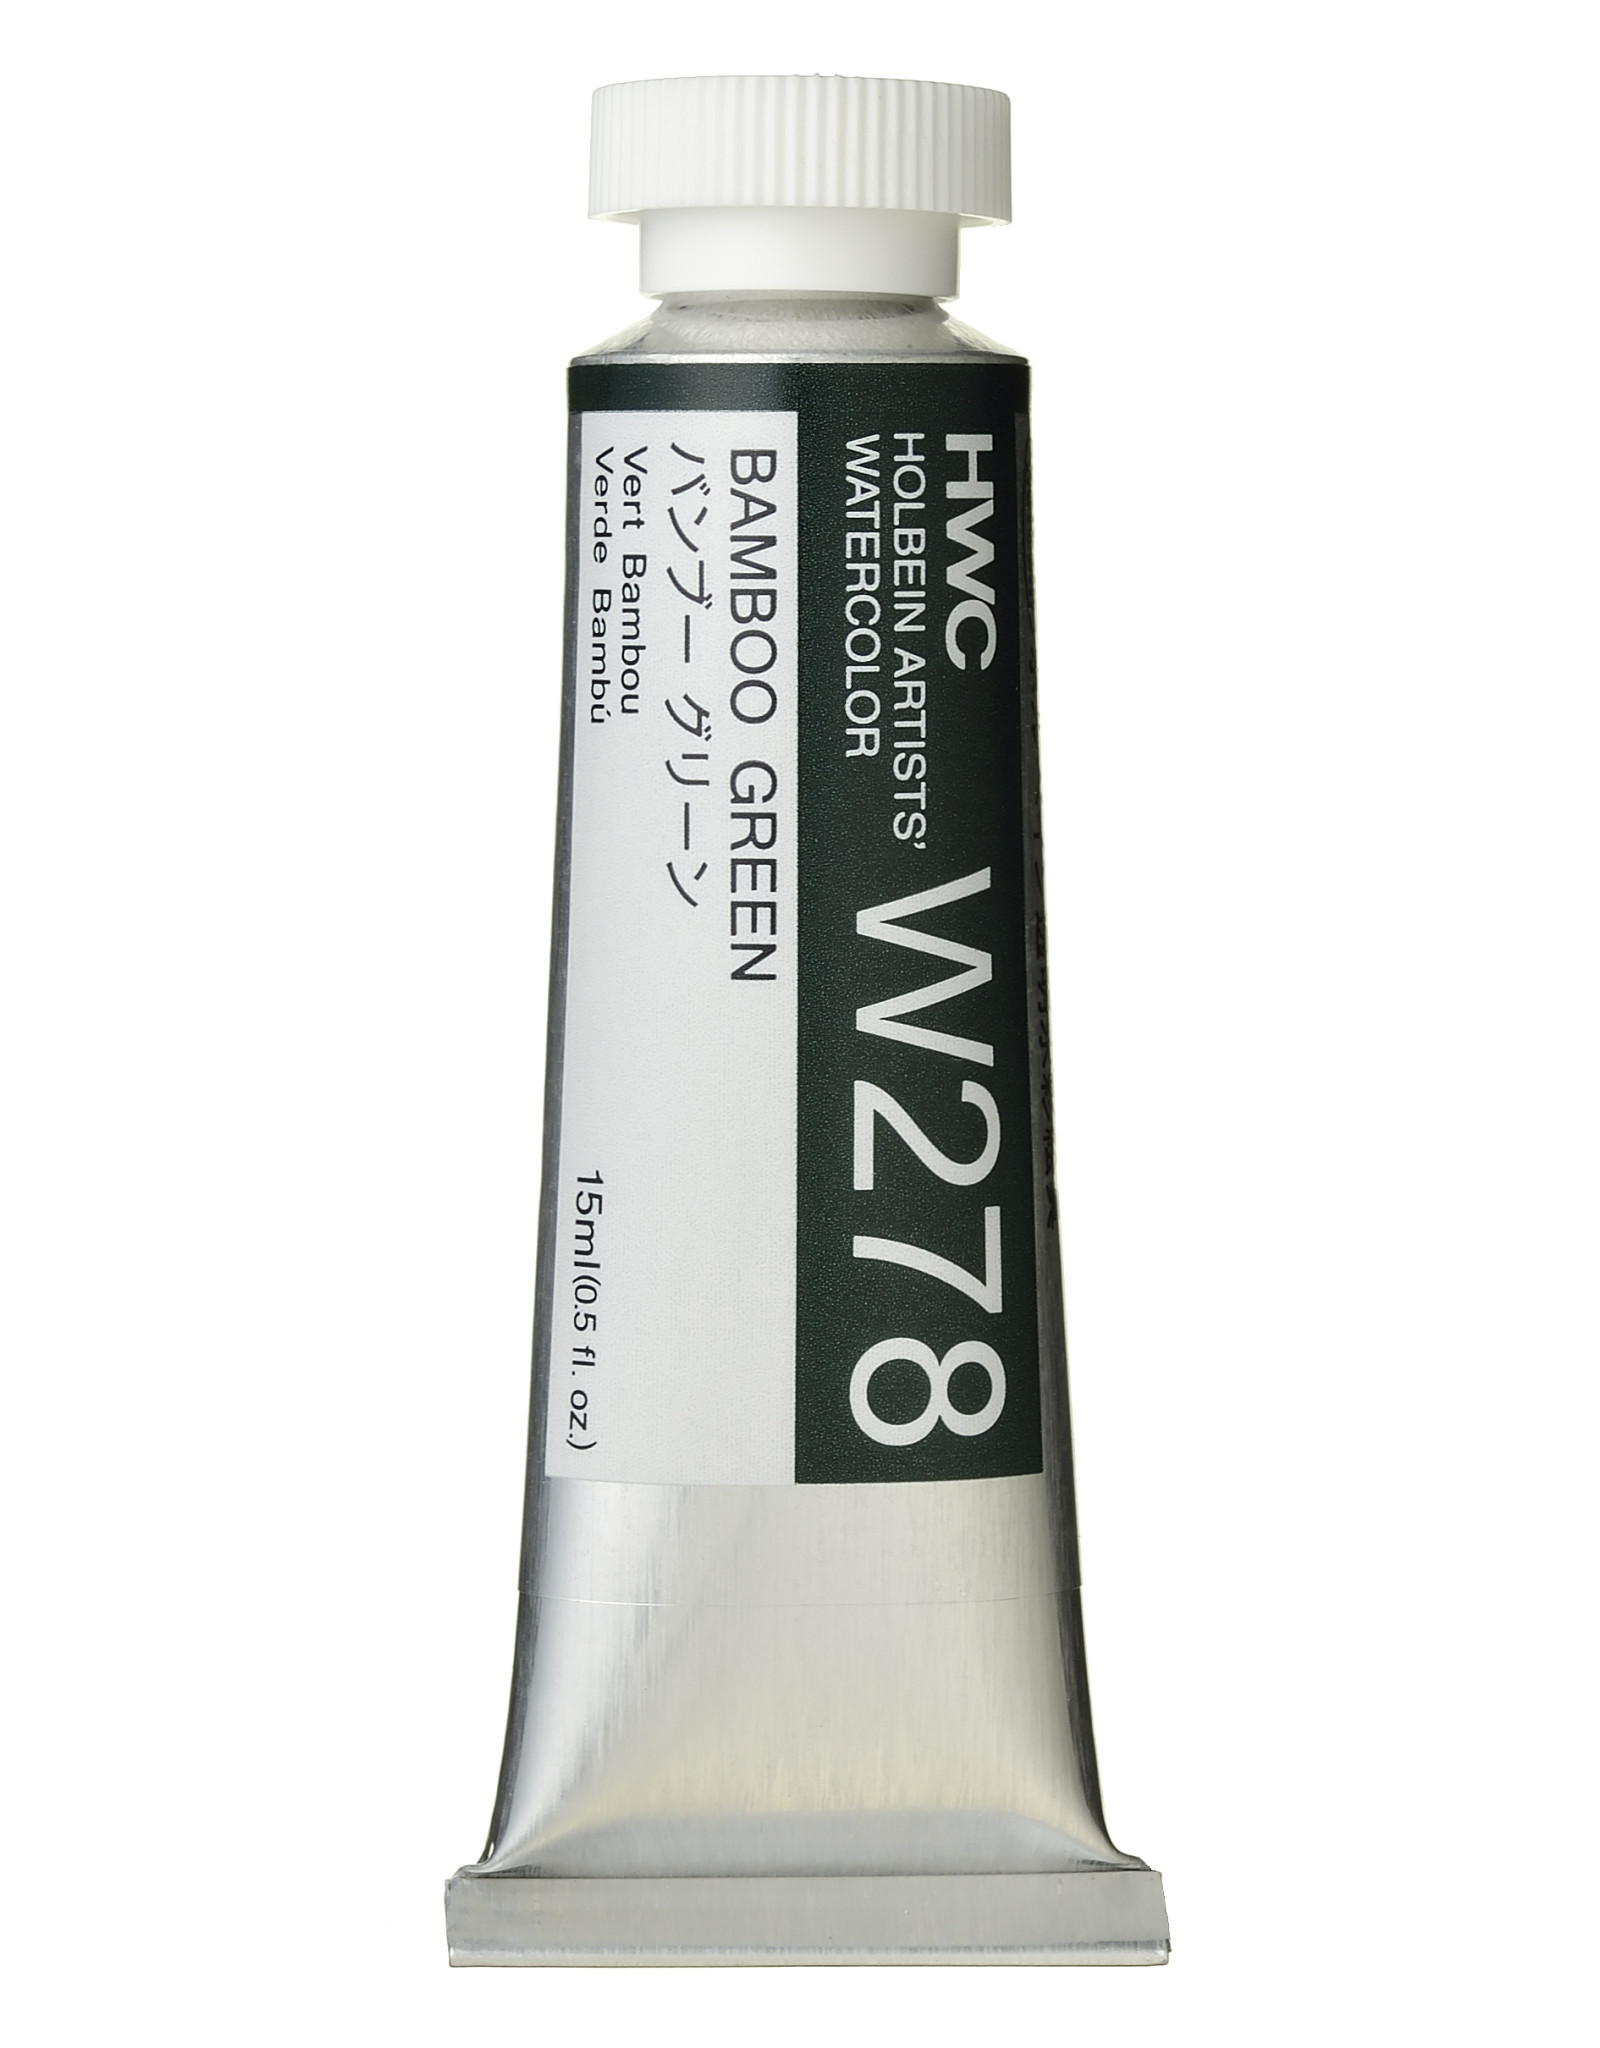 HOLBEIN Holbein Artist’s Watercolor, Bamboo Green 15ml